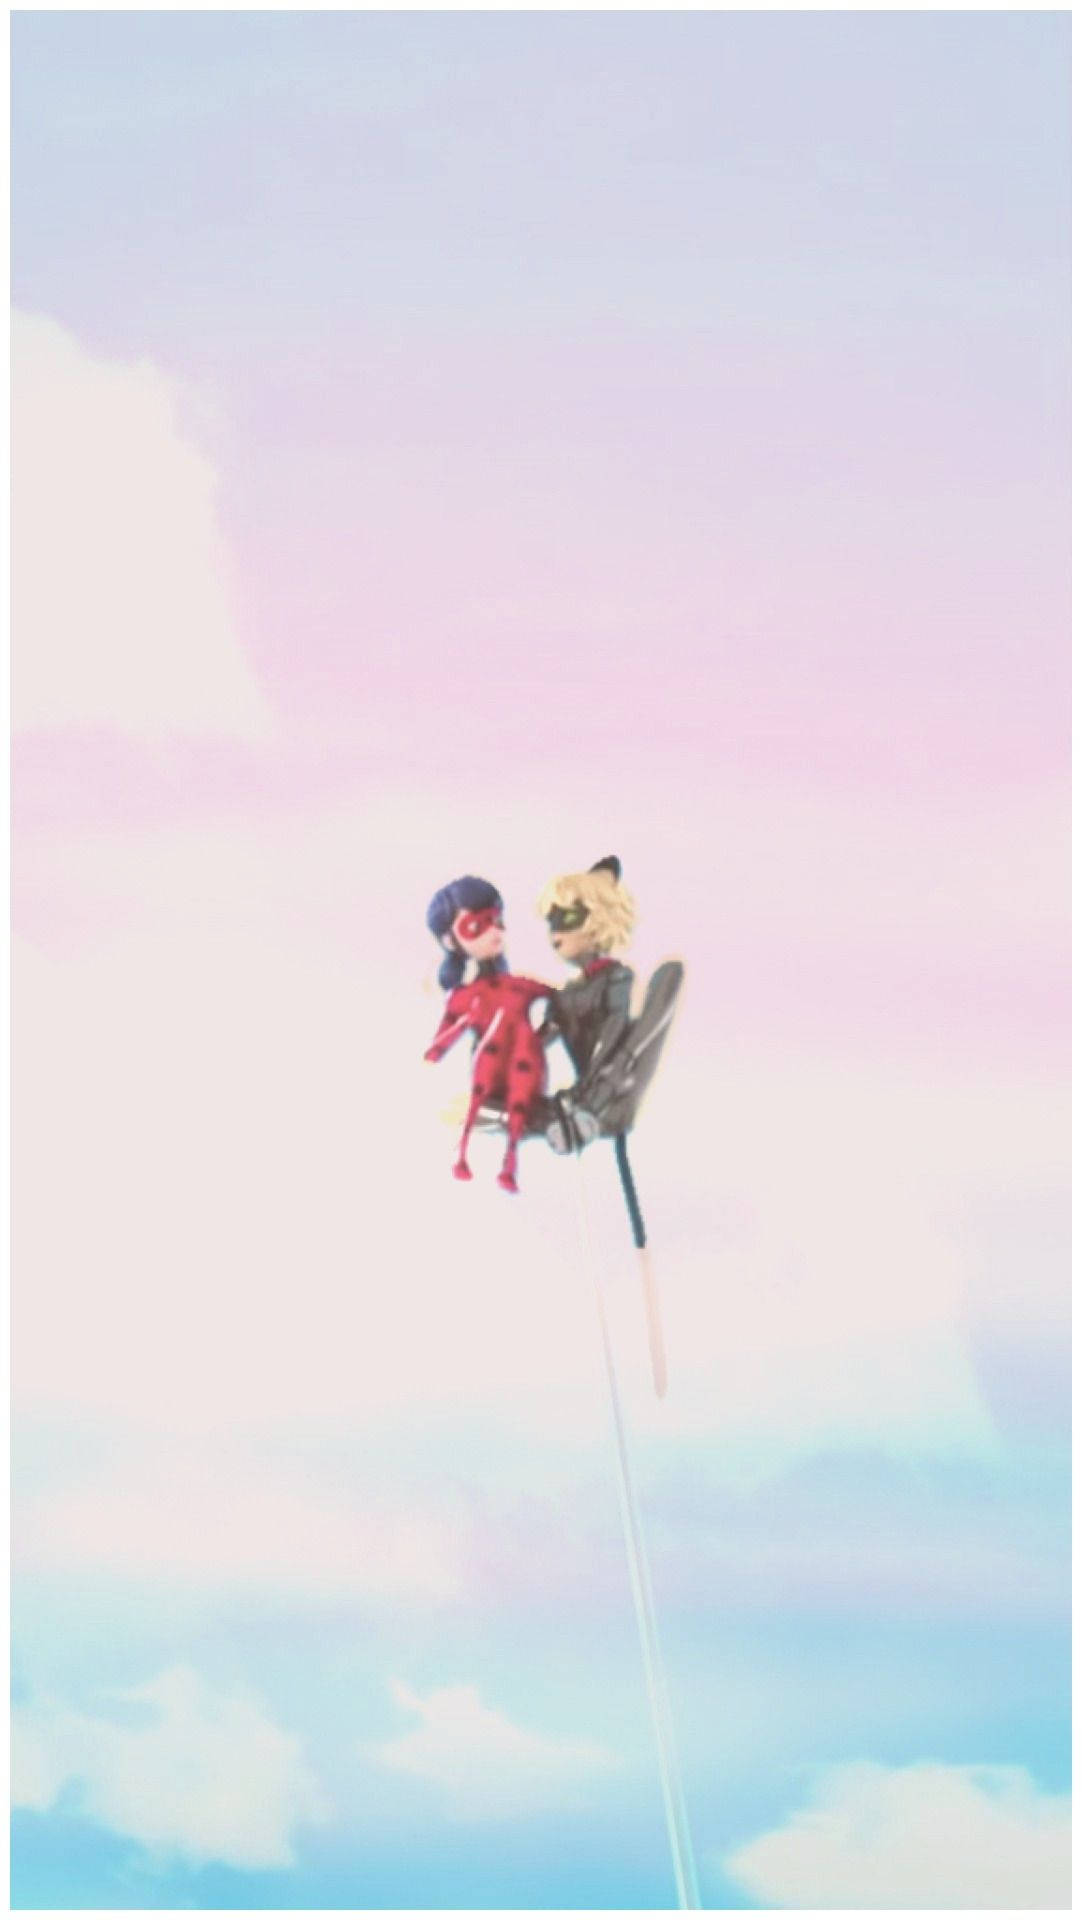 Miraculous Ladybug And Cat Noir In The Clouds